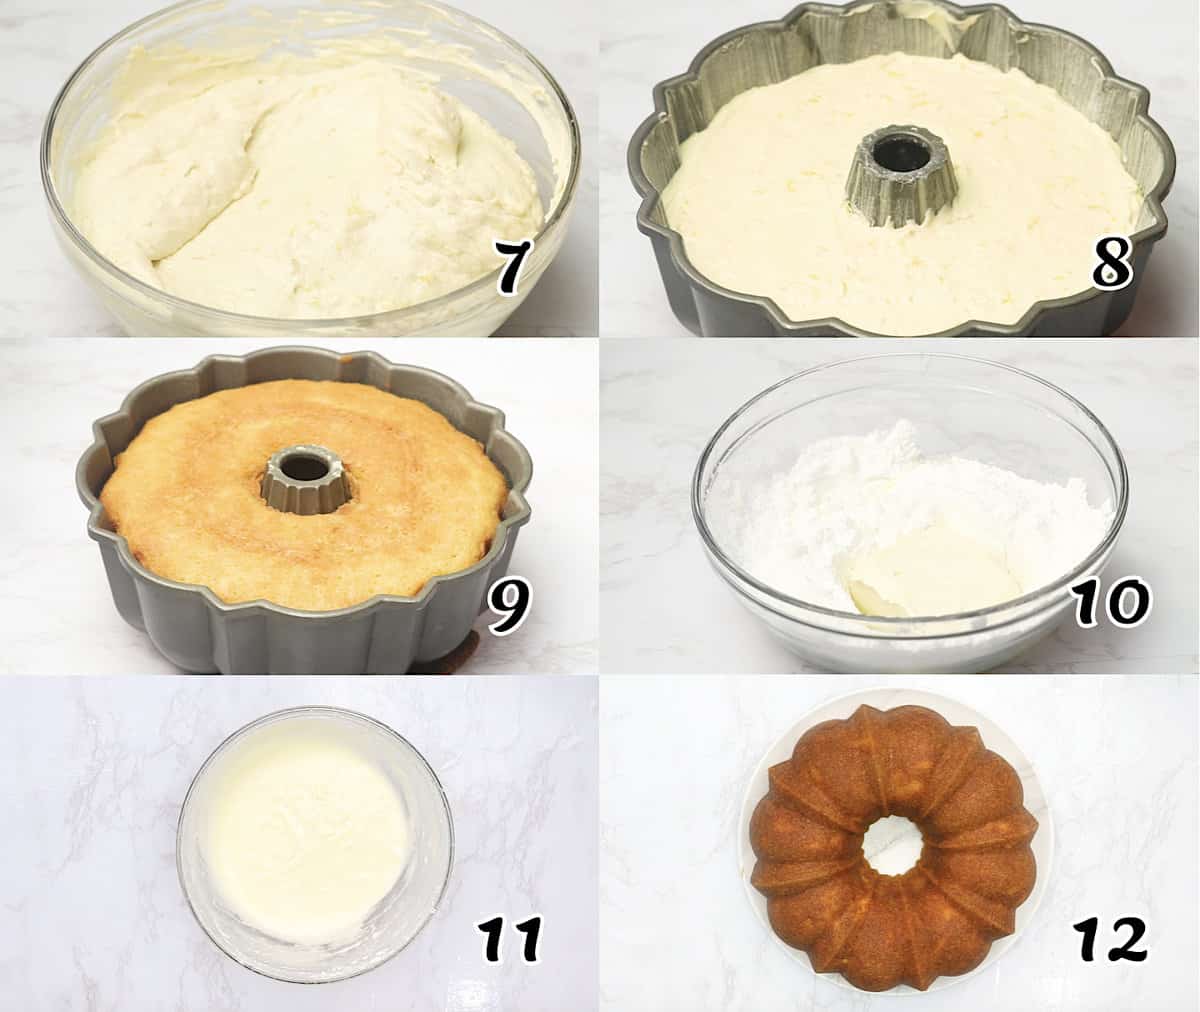 Pour the batter into the bundt pan and bake. while making the glaze.